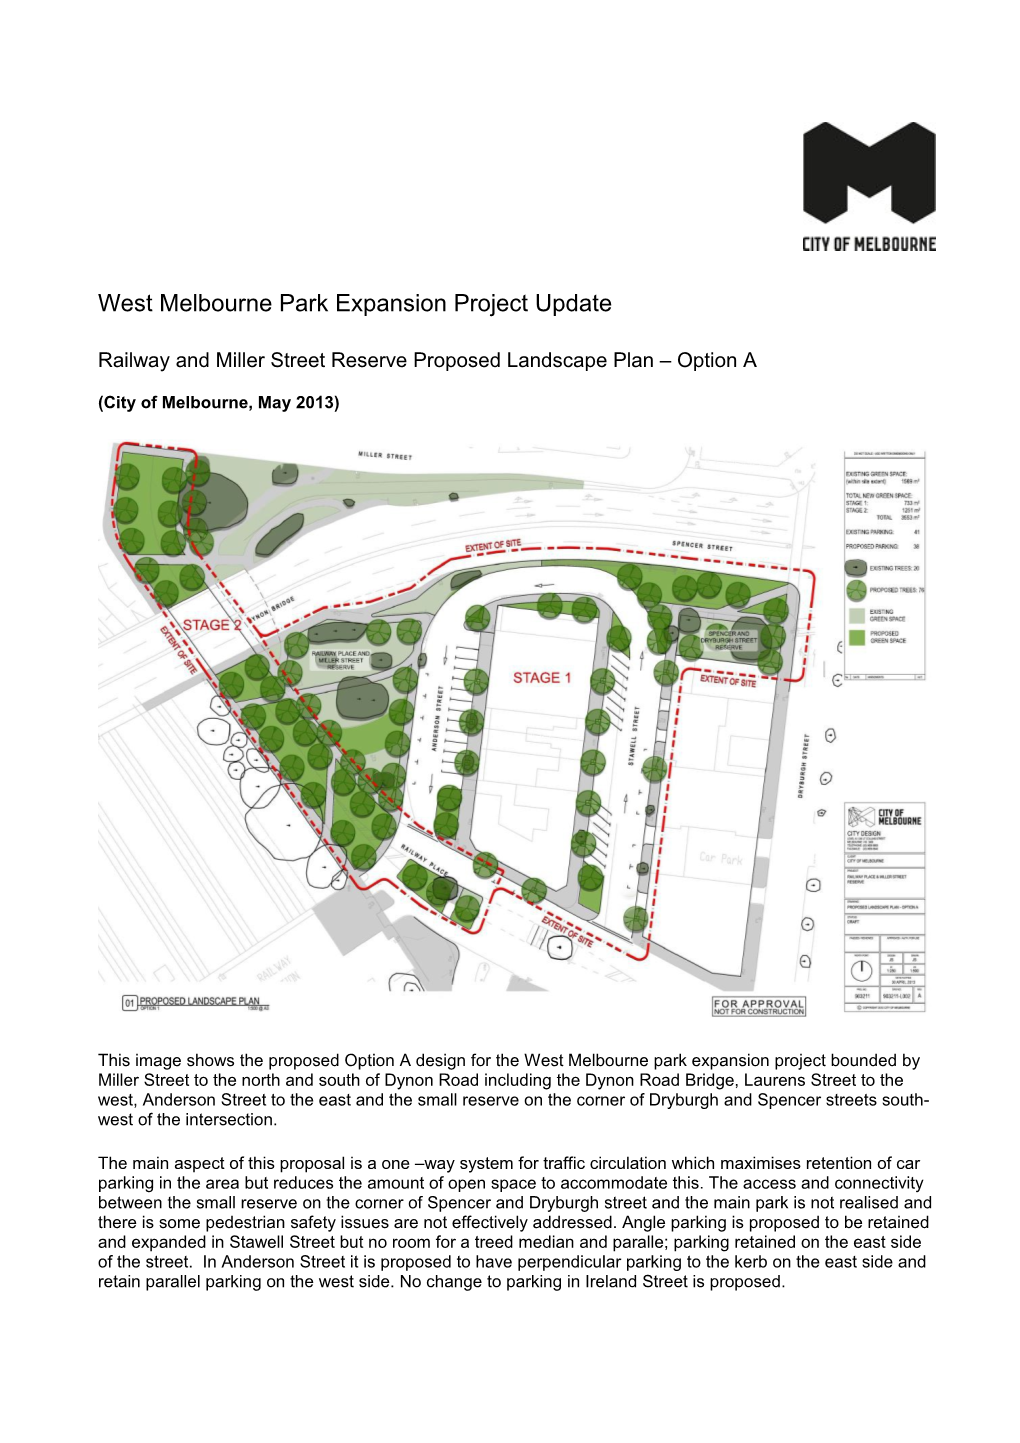 Railway and Miller Street Reserve Proposed Landscape Plan Option A